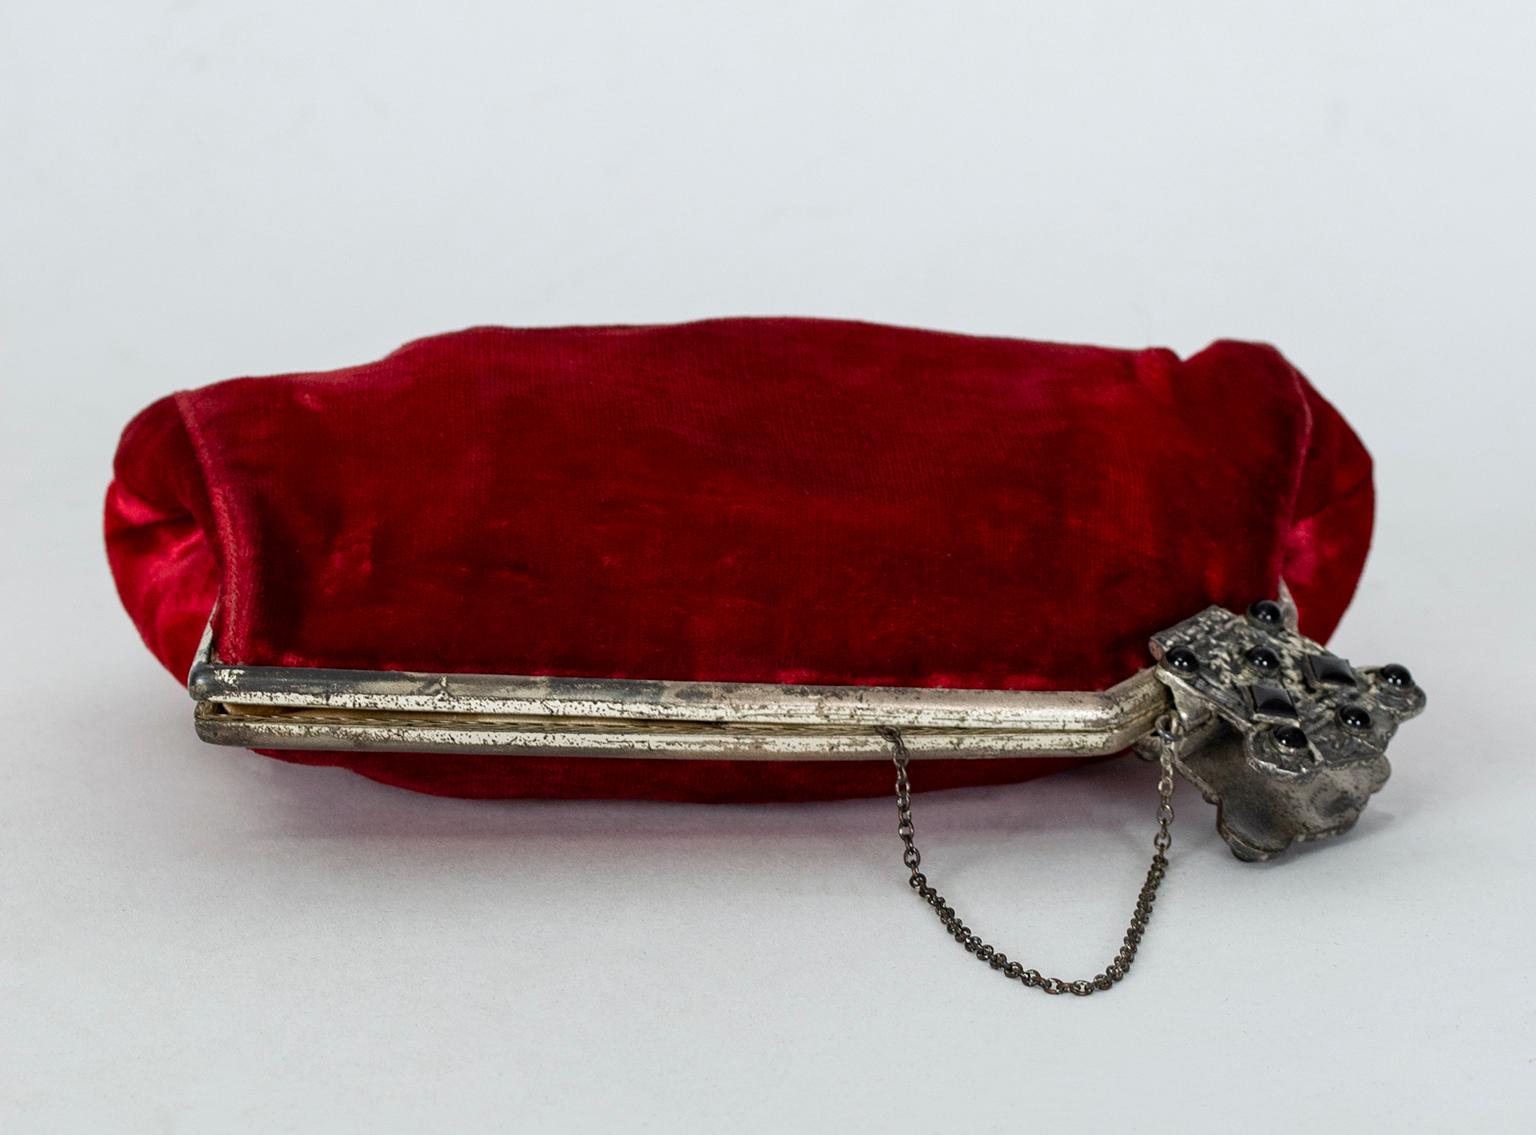 Women's Red Velvet Evening Clutch with Onyx Closure and Chained Mirror, 1950s